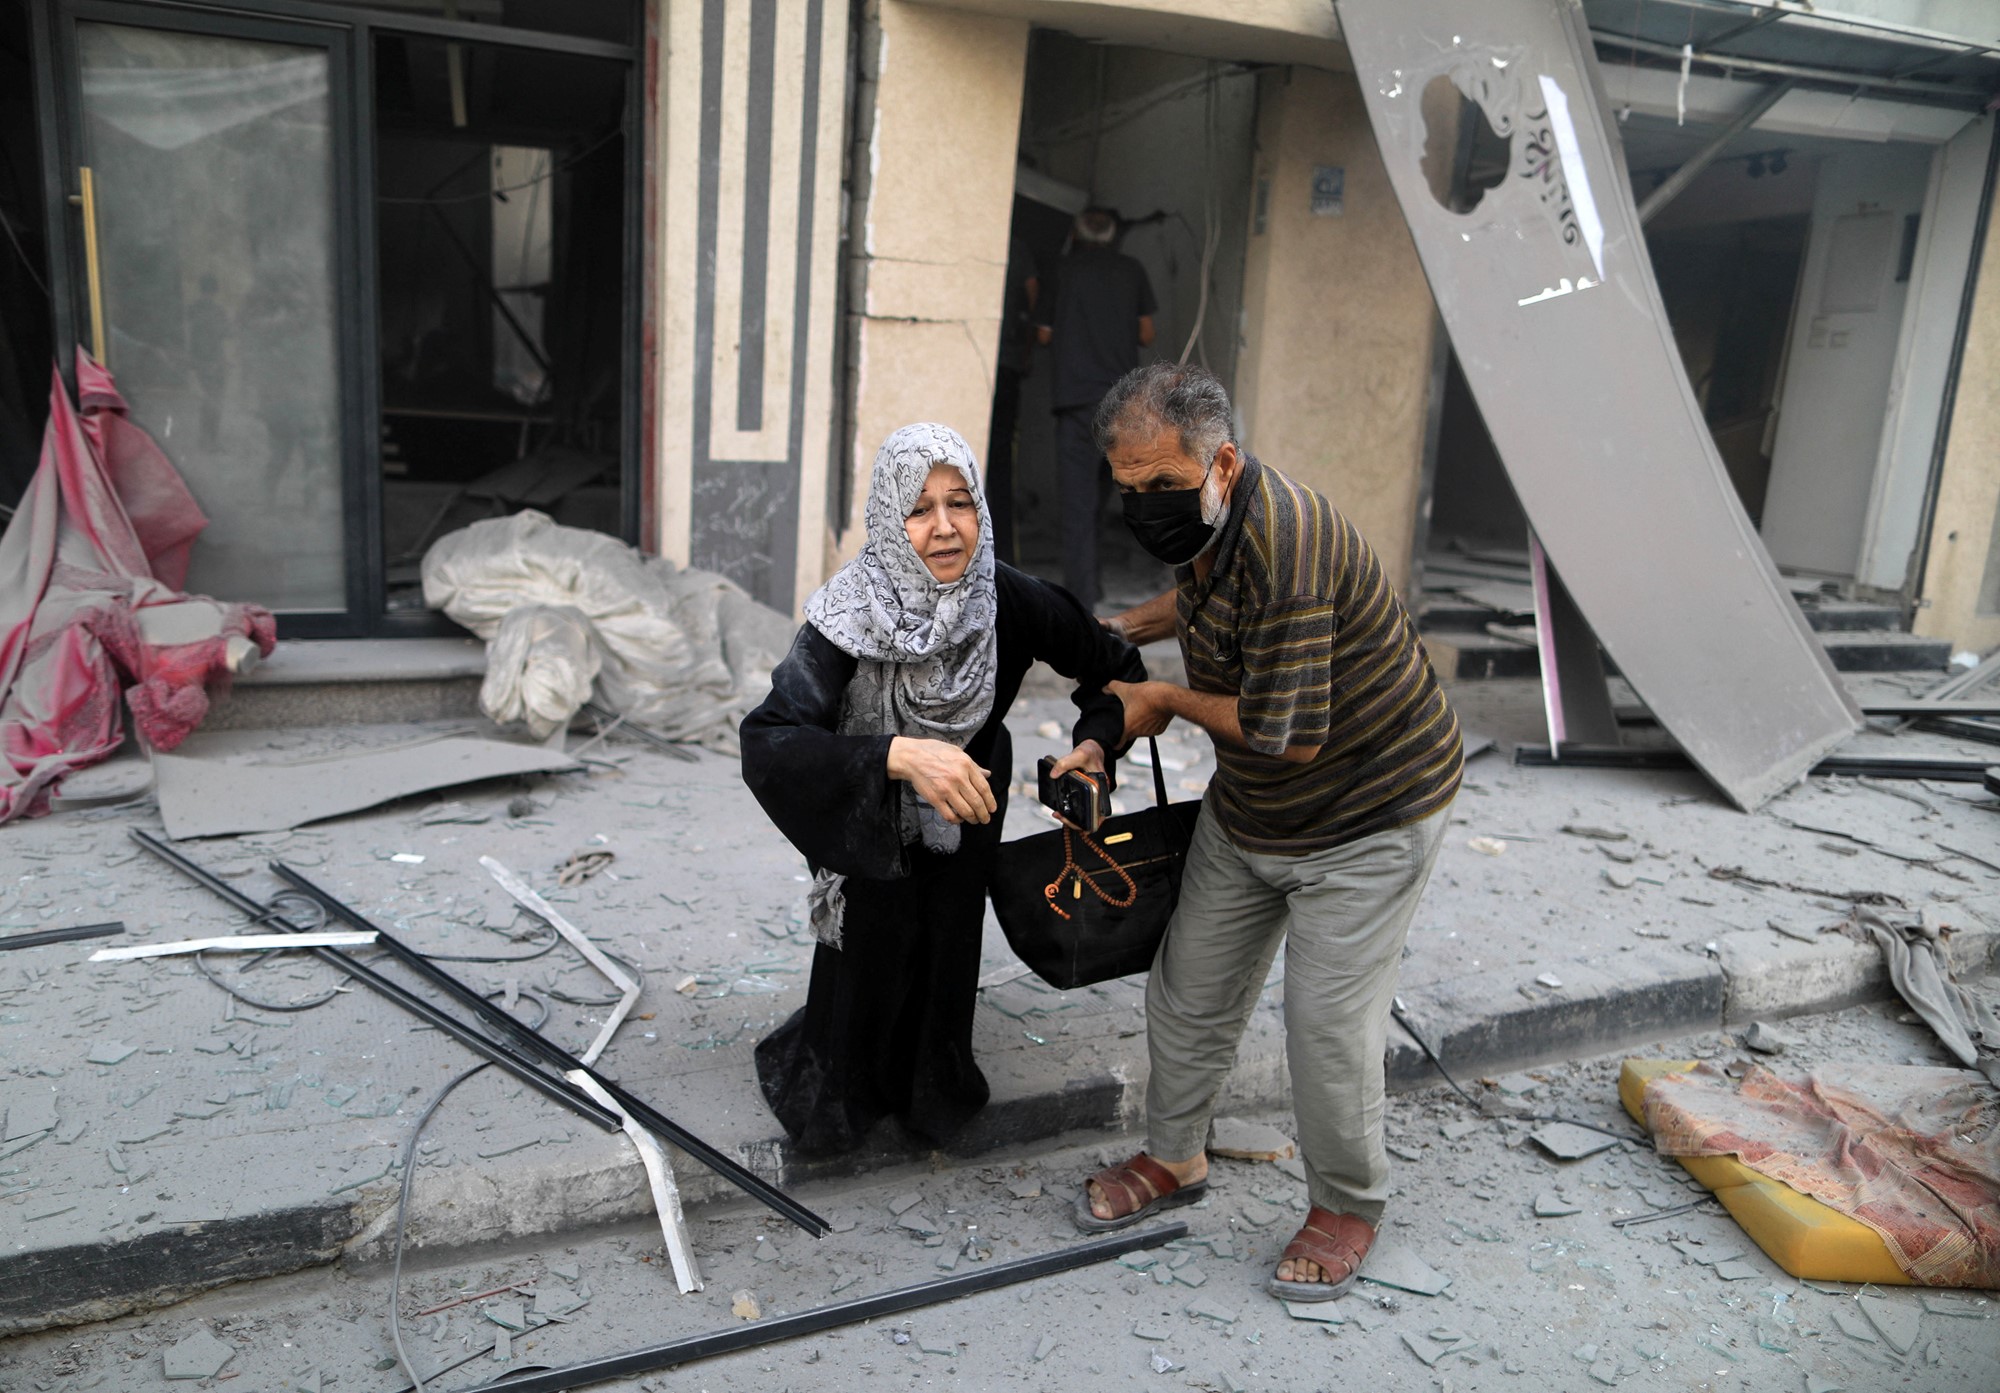 An older man helps hold up an older woman as she stumbles, outside a destroyed building